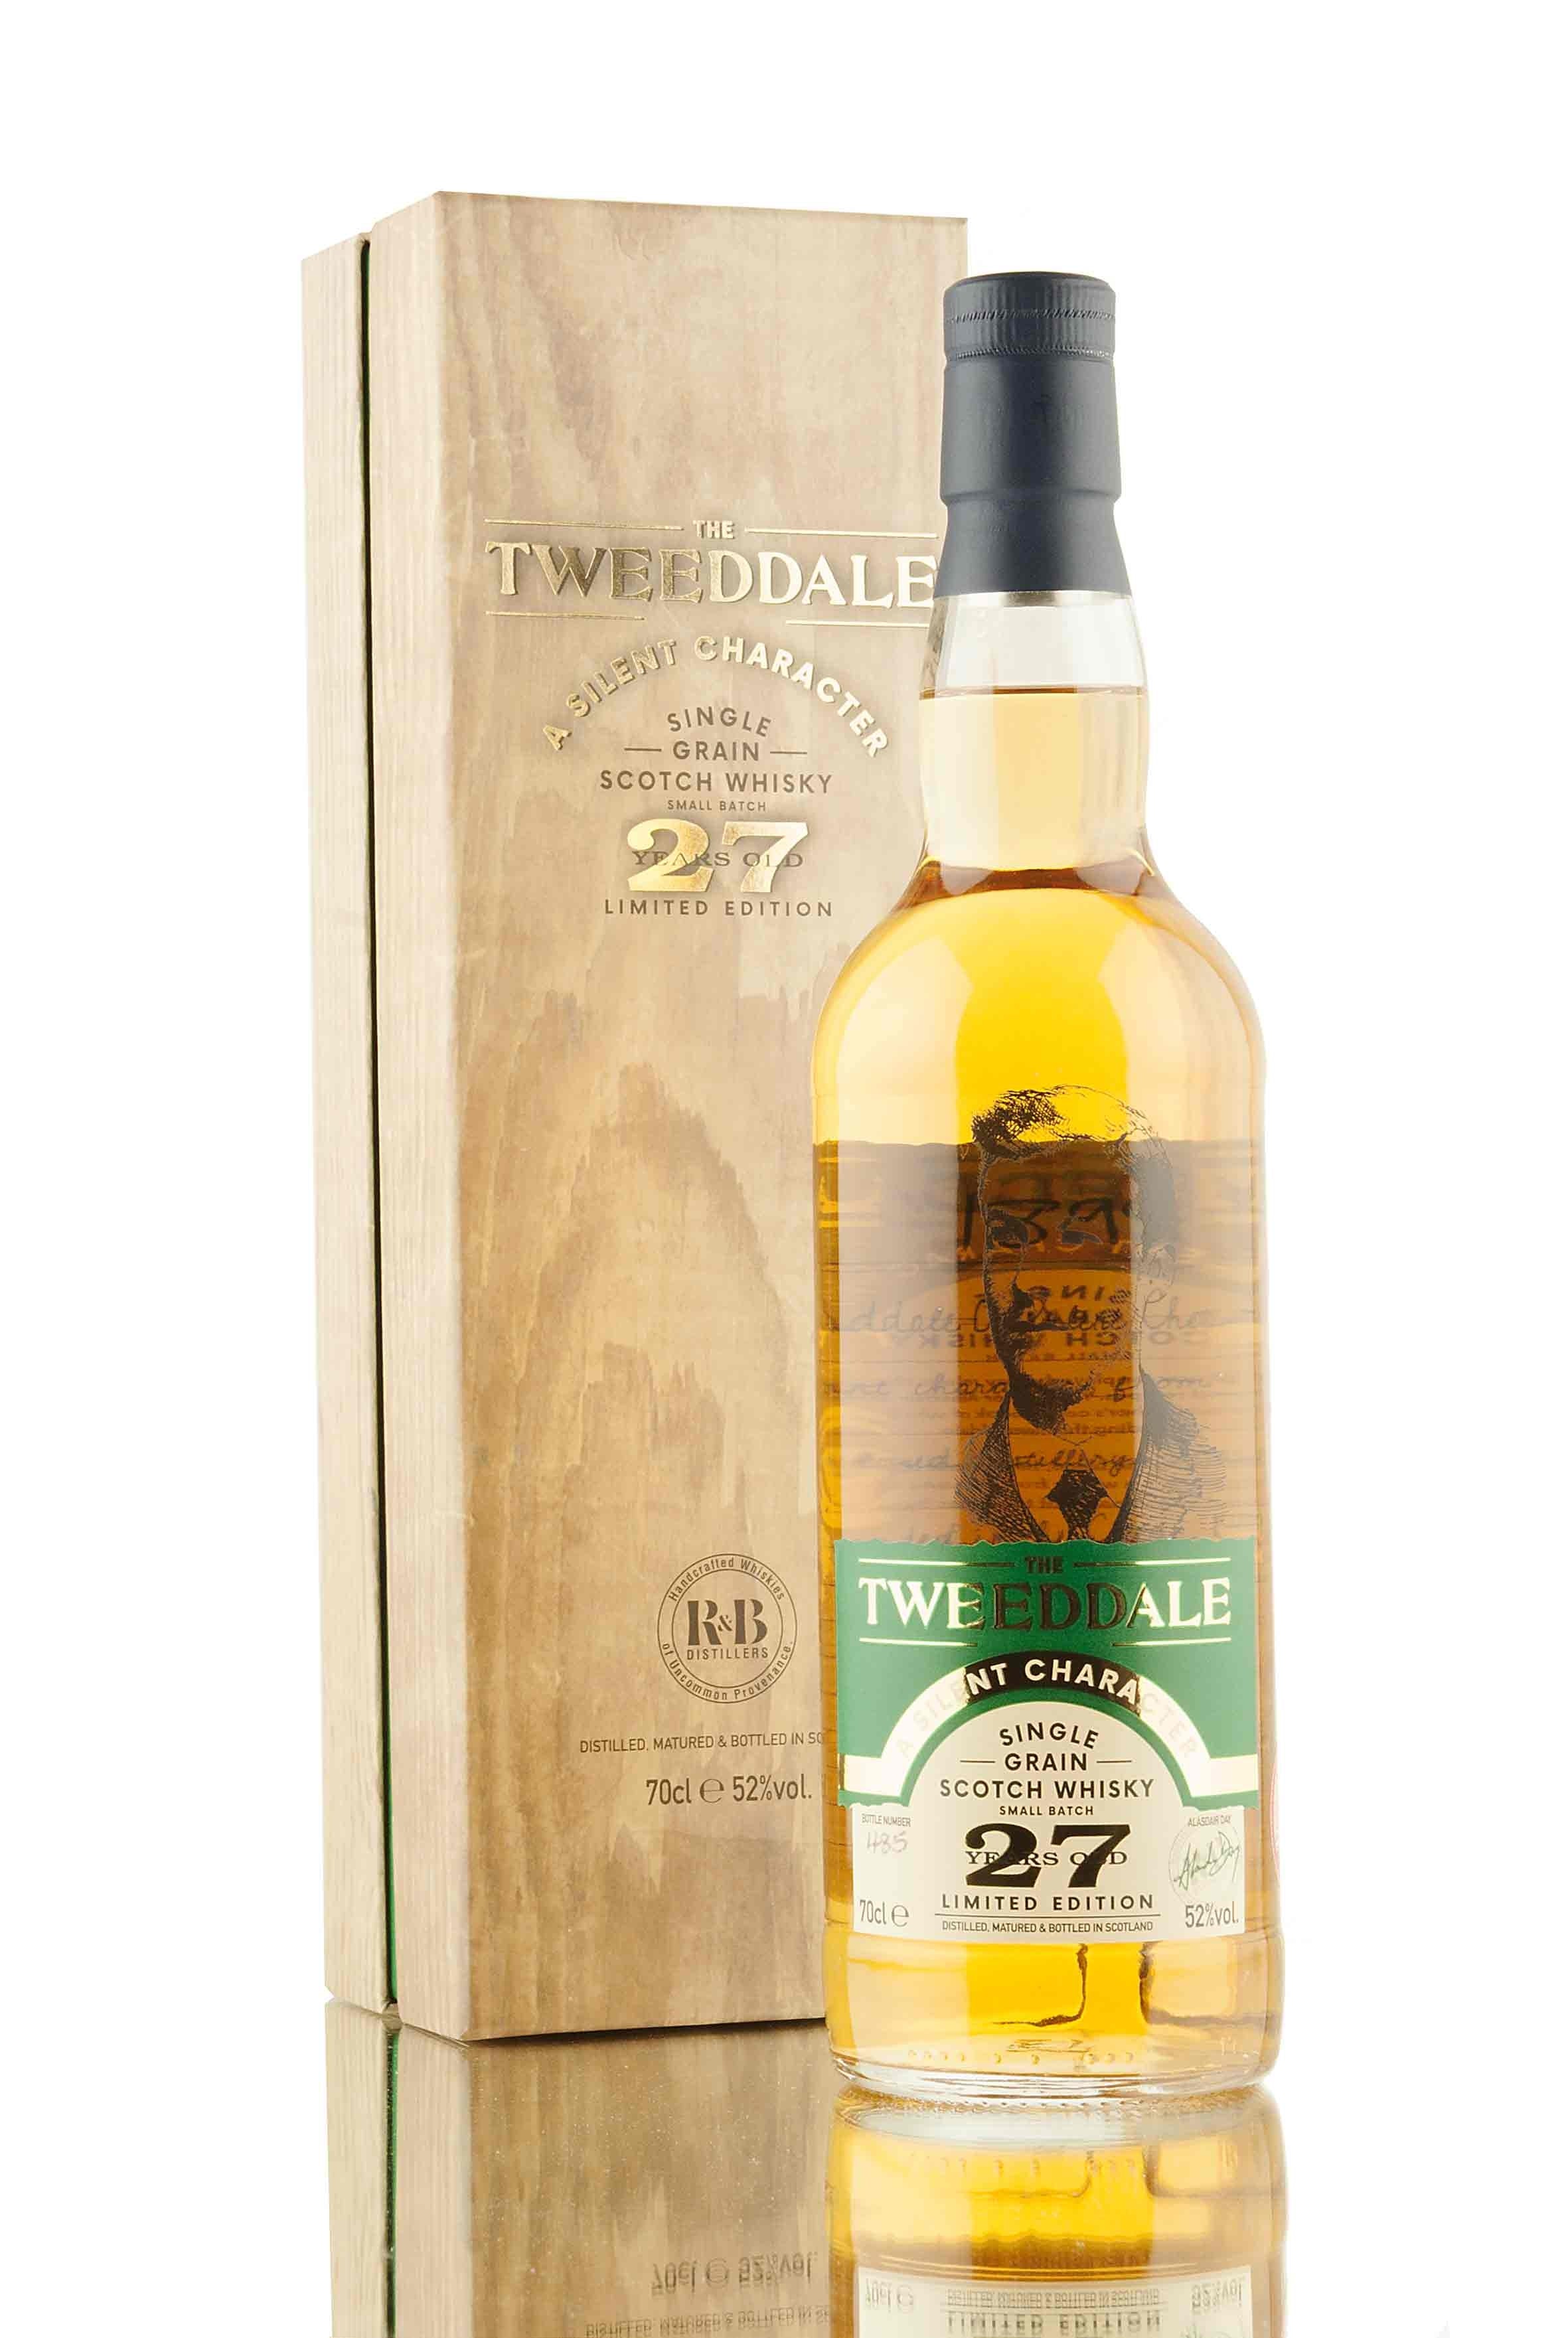 The Tweeddale A Silent Character | 27 Year Old